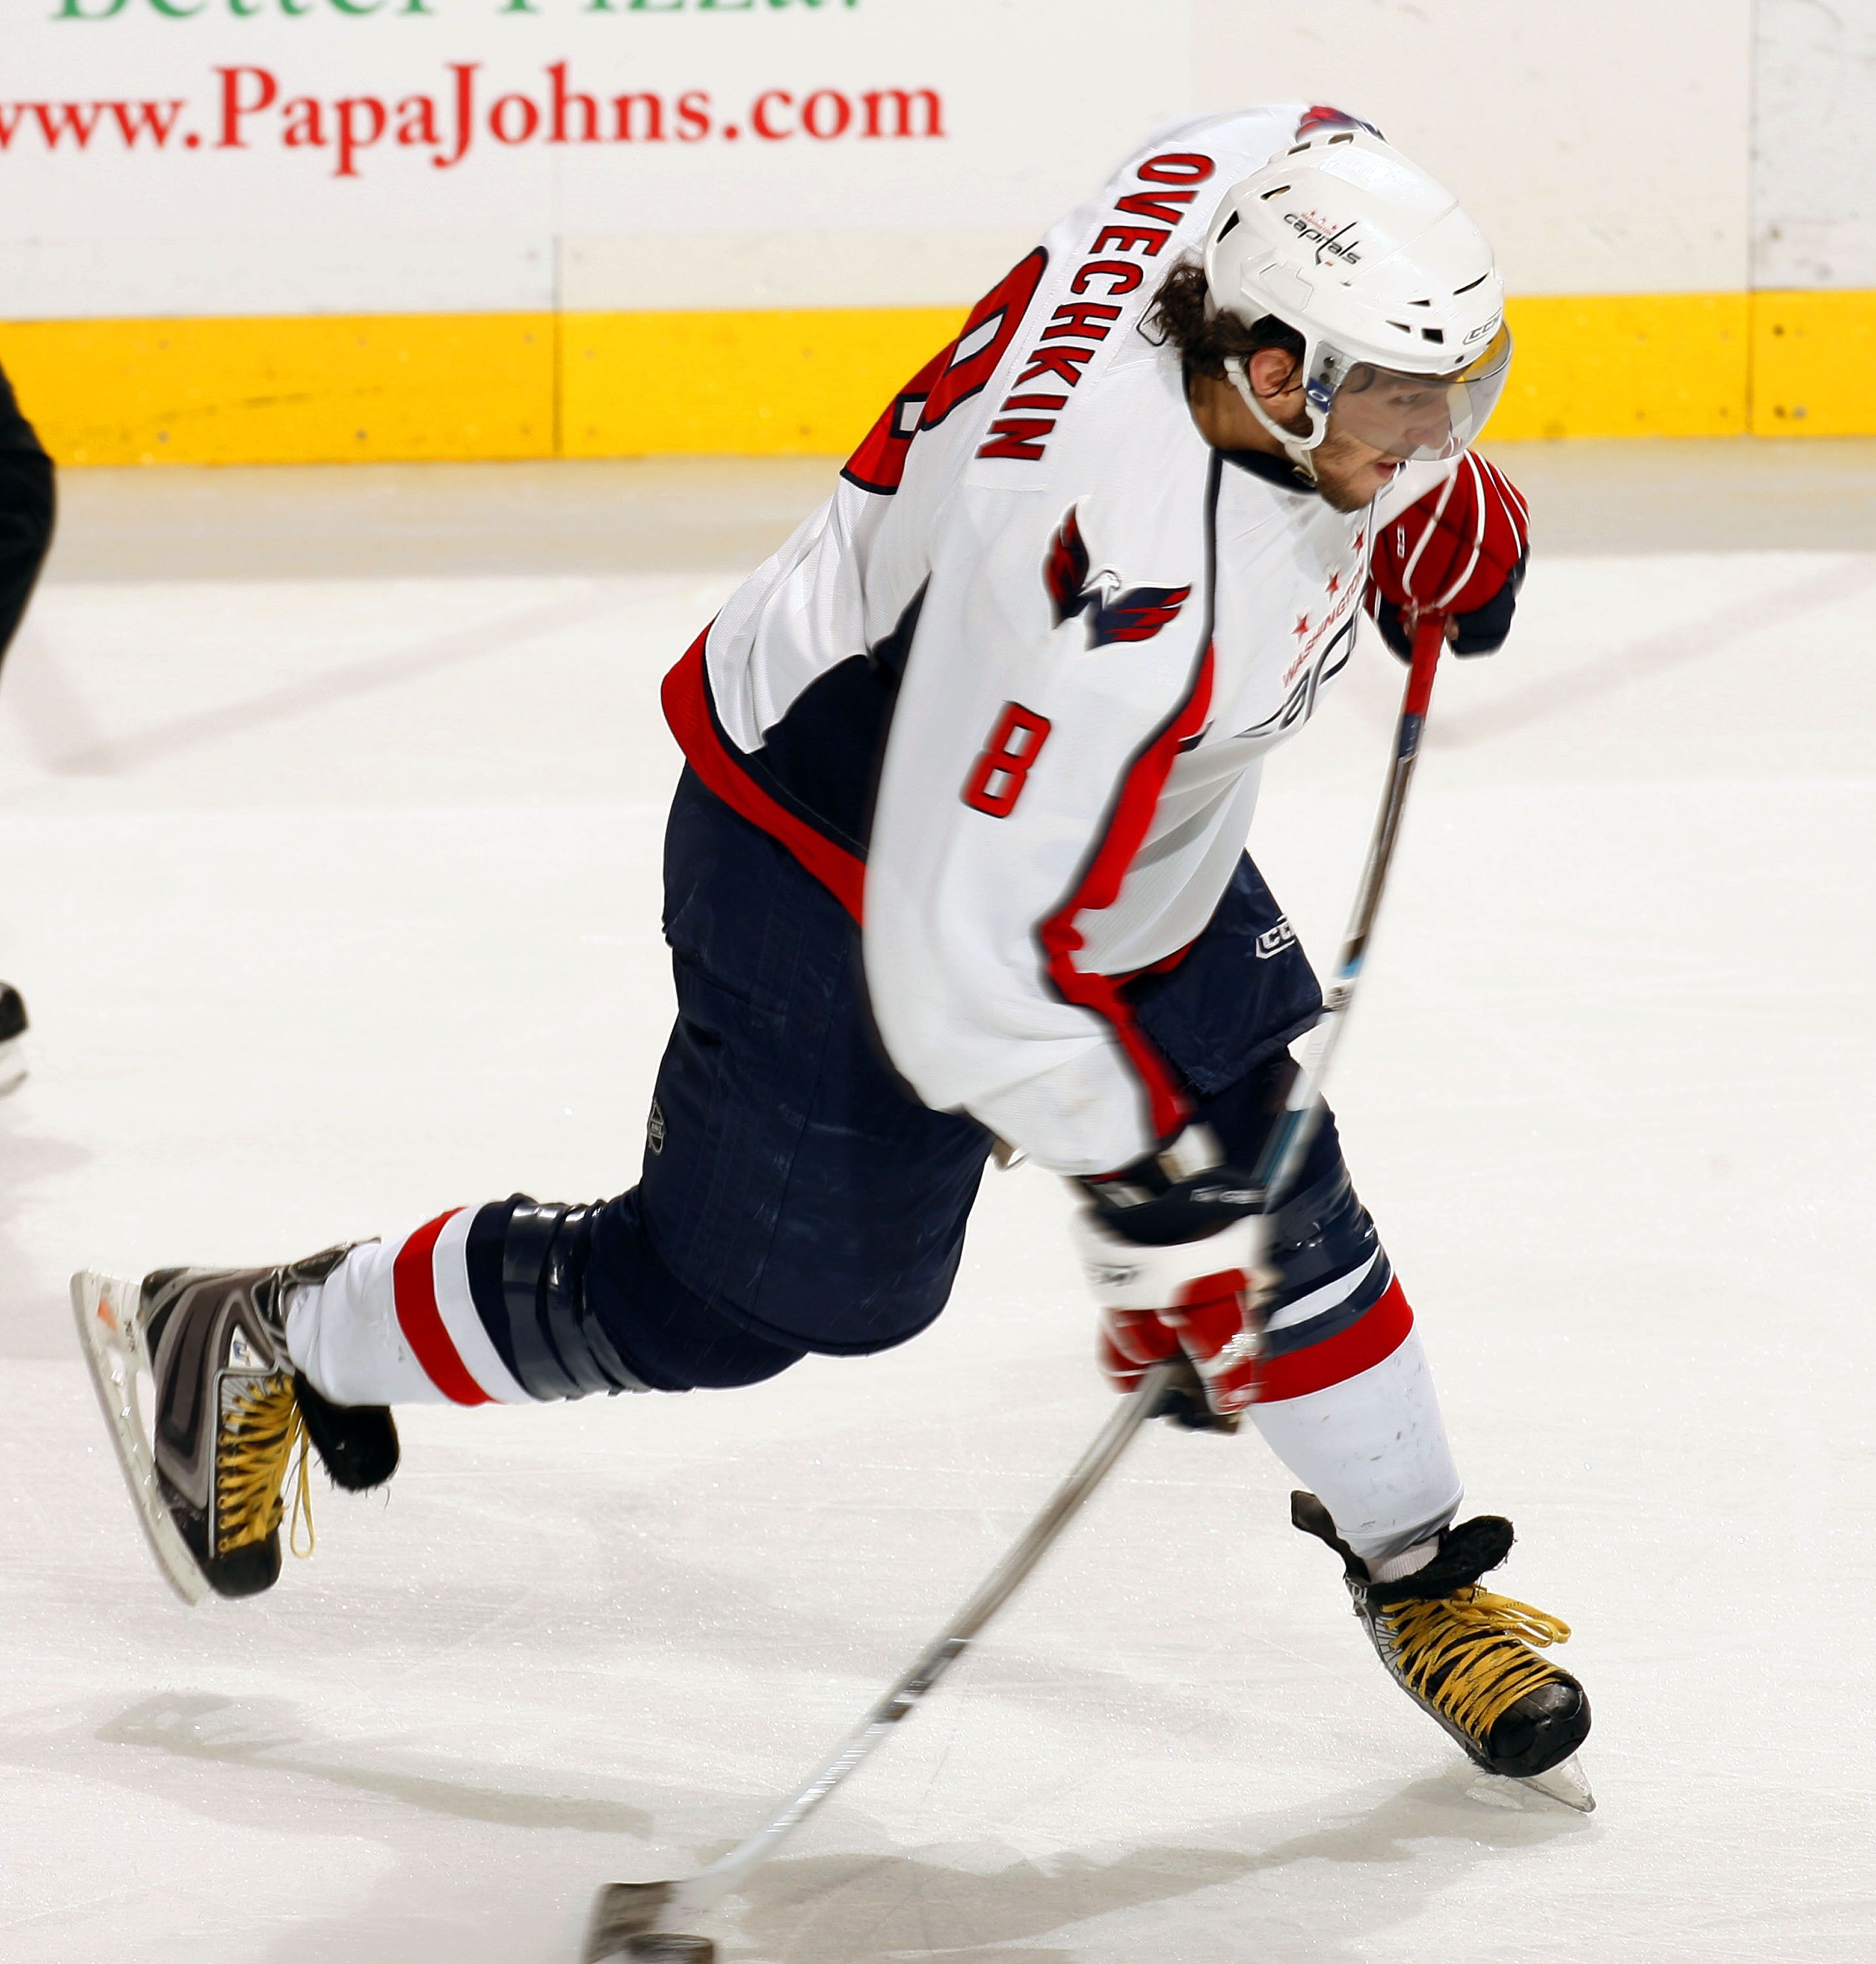 Popular NHL player Alexander Ovechkin wallpapers and images ...